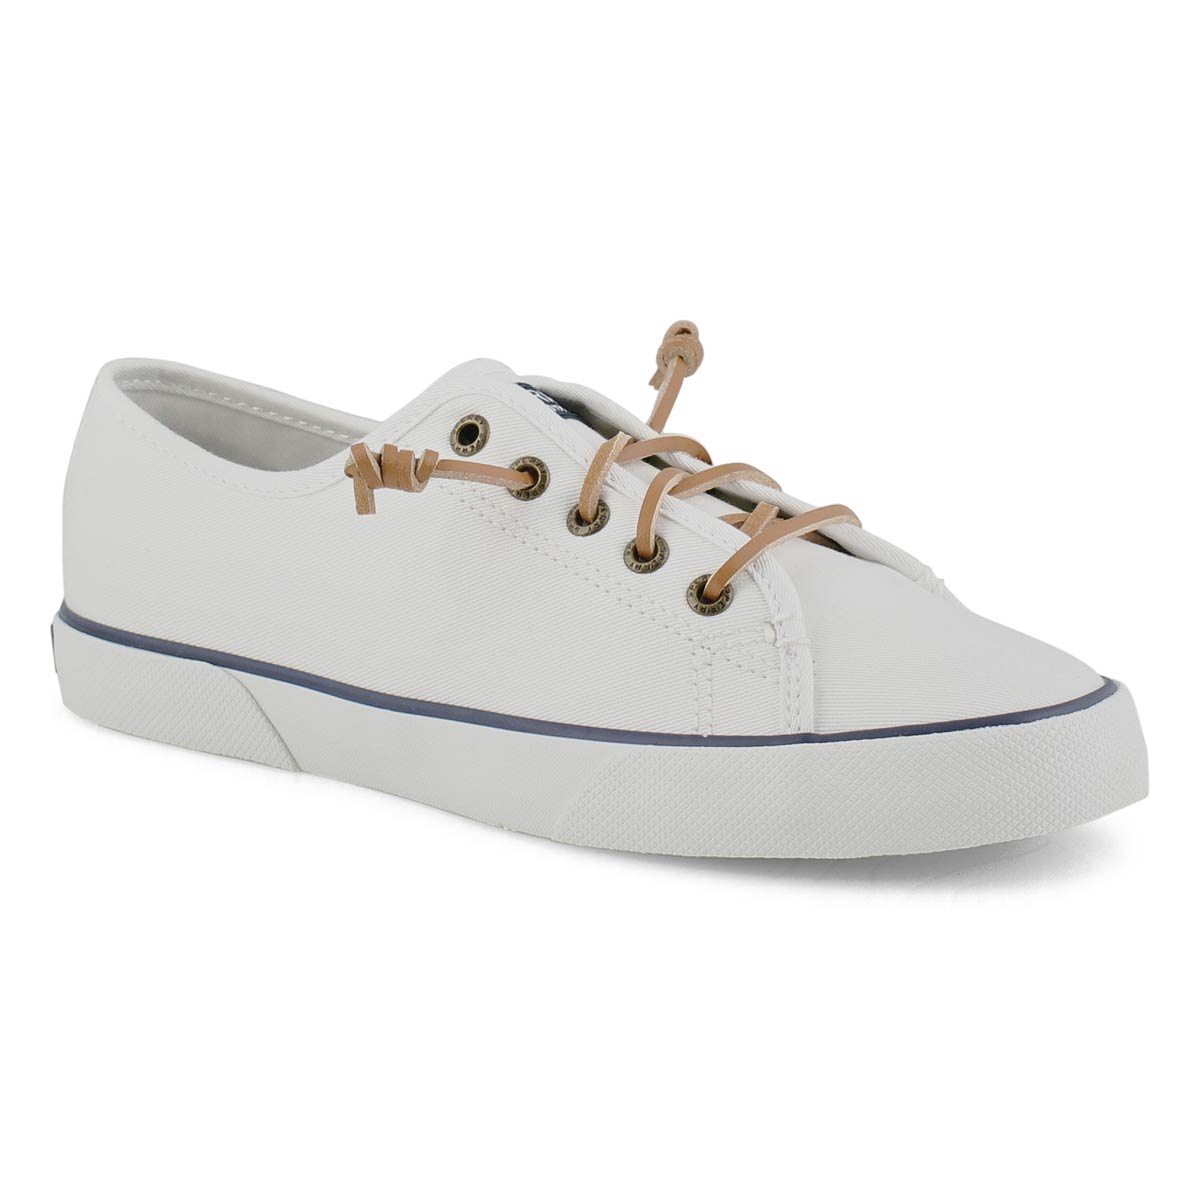 Sperry Women's PIER VIEW white sneakers 